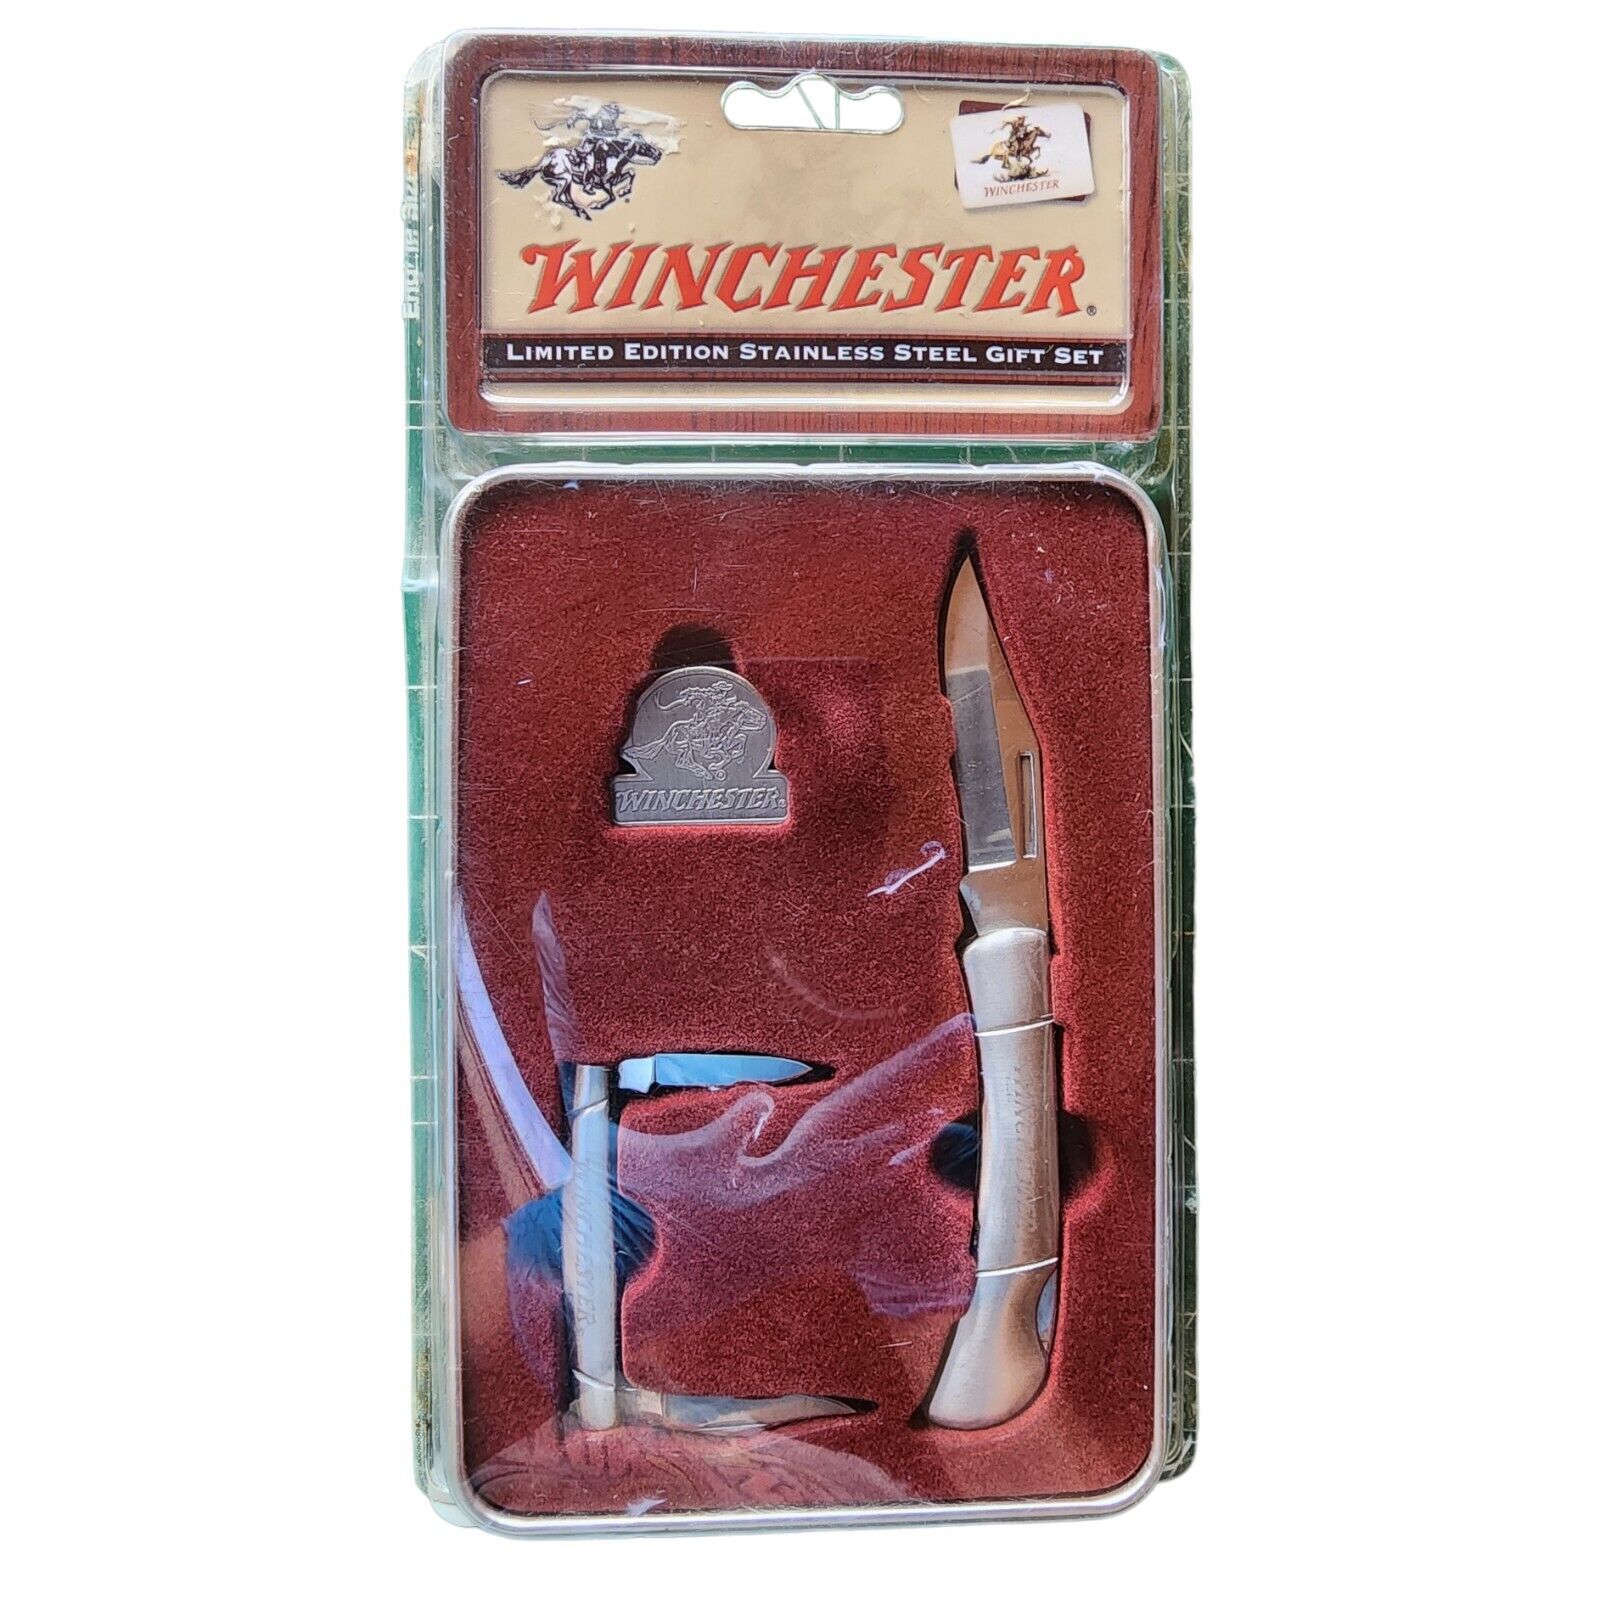 Winchester Limited Edition Stainless Steel Gift Set 2 Folding Pocket Knives